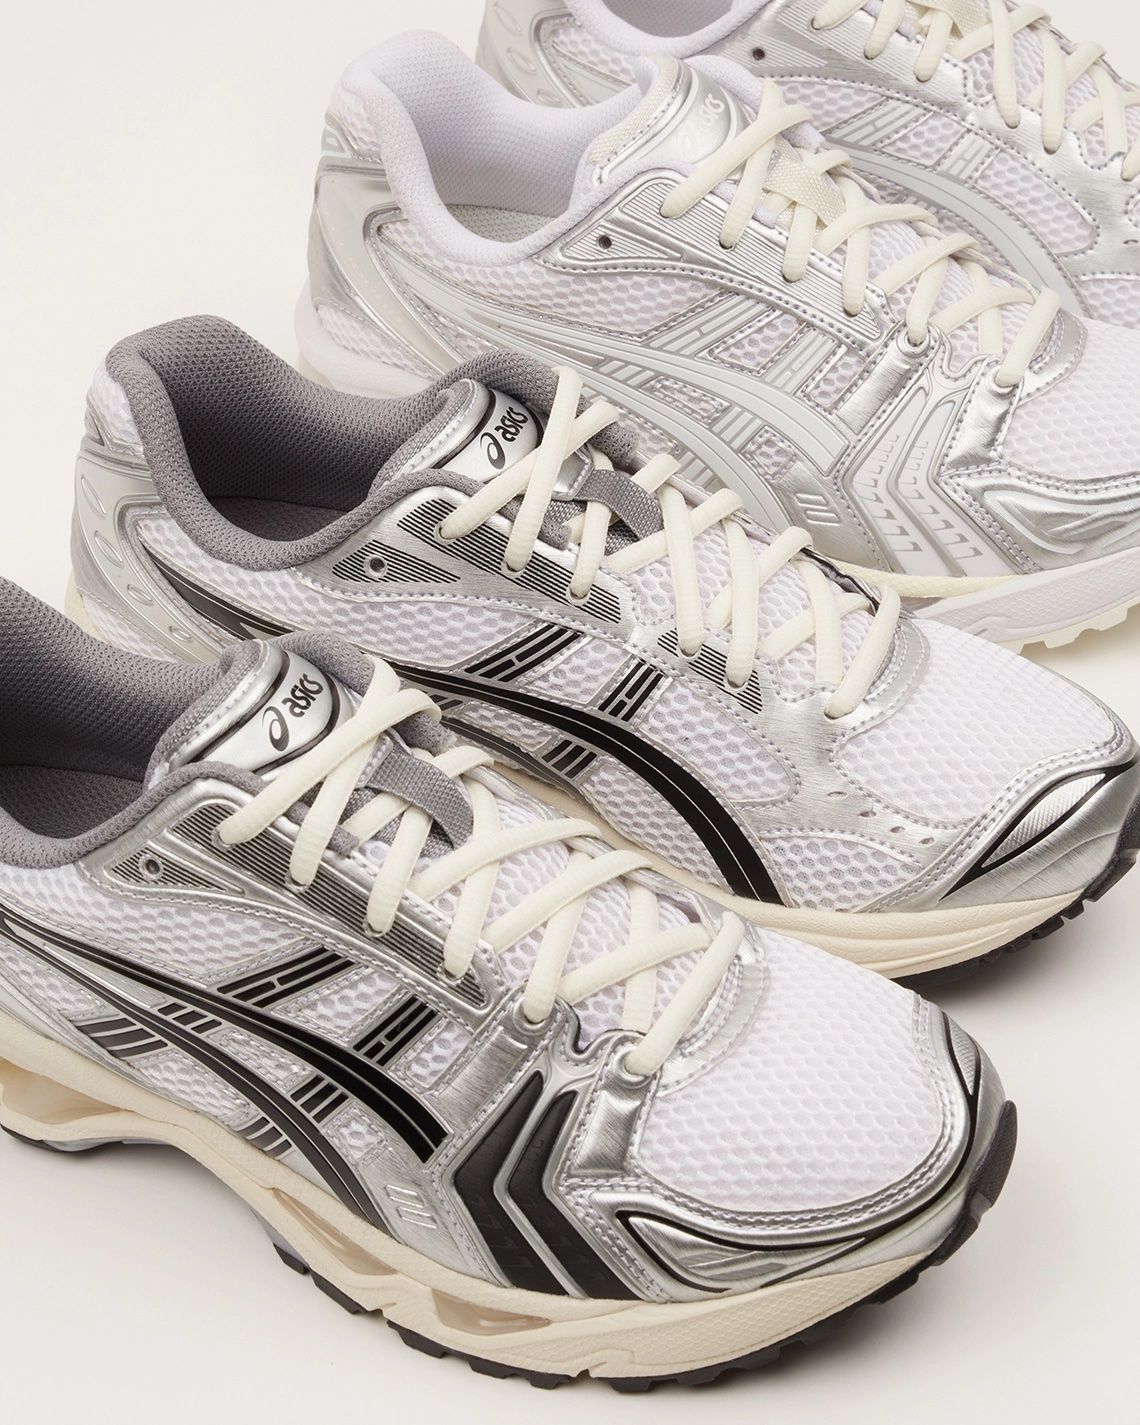 How Often Does Asics Release New Shoes? - Shoe Effect